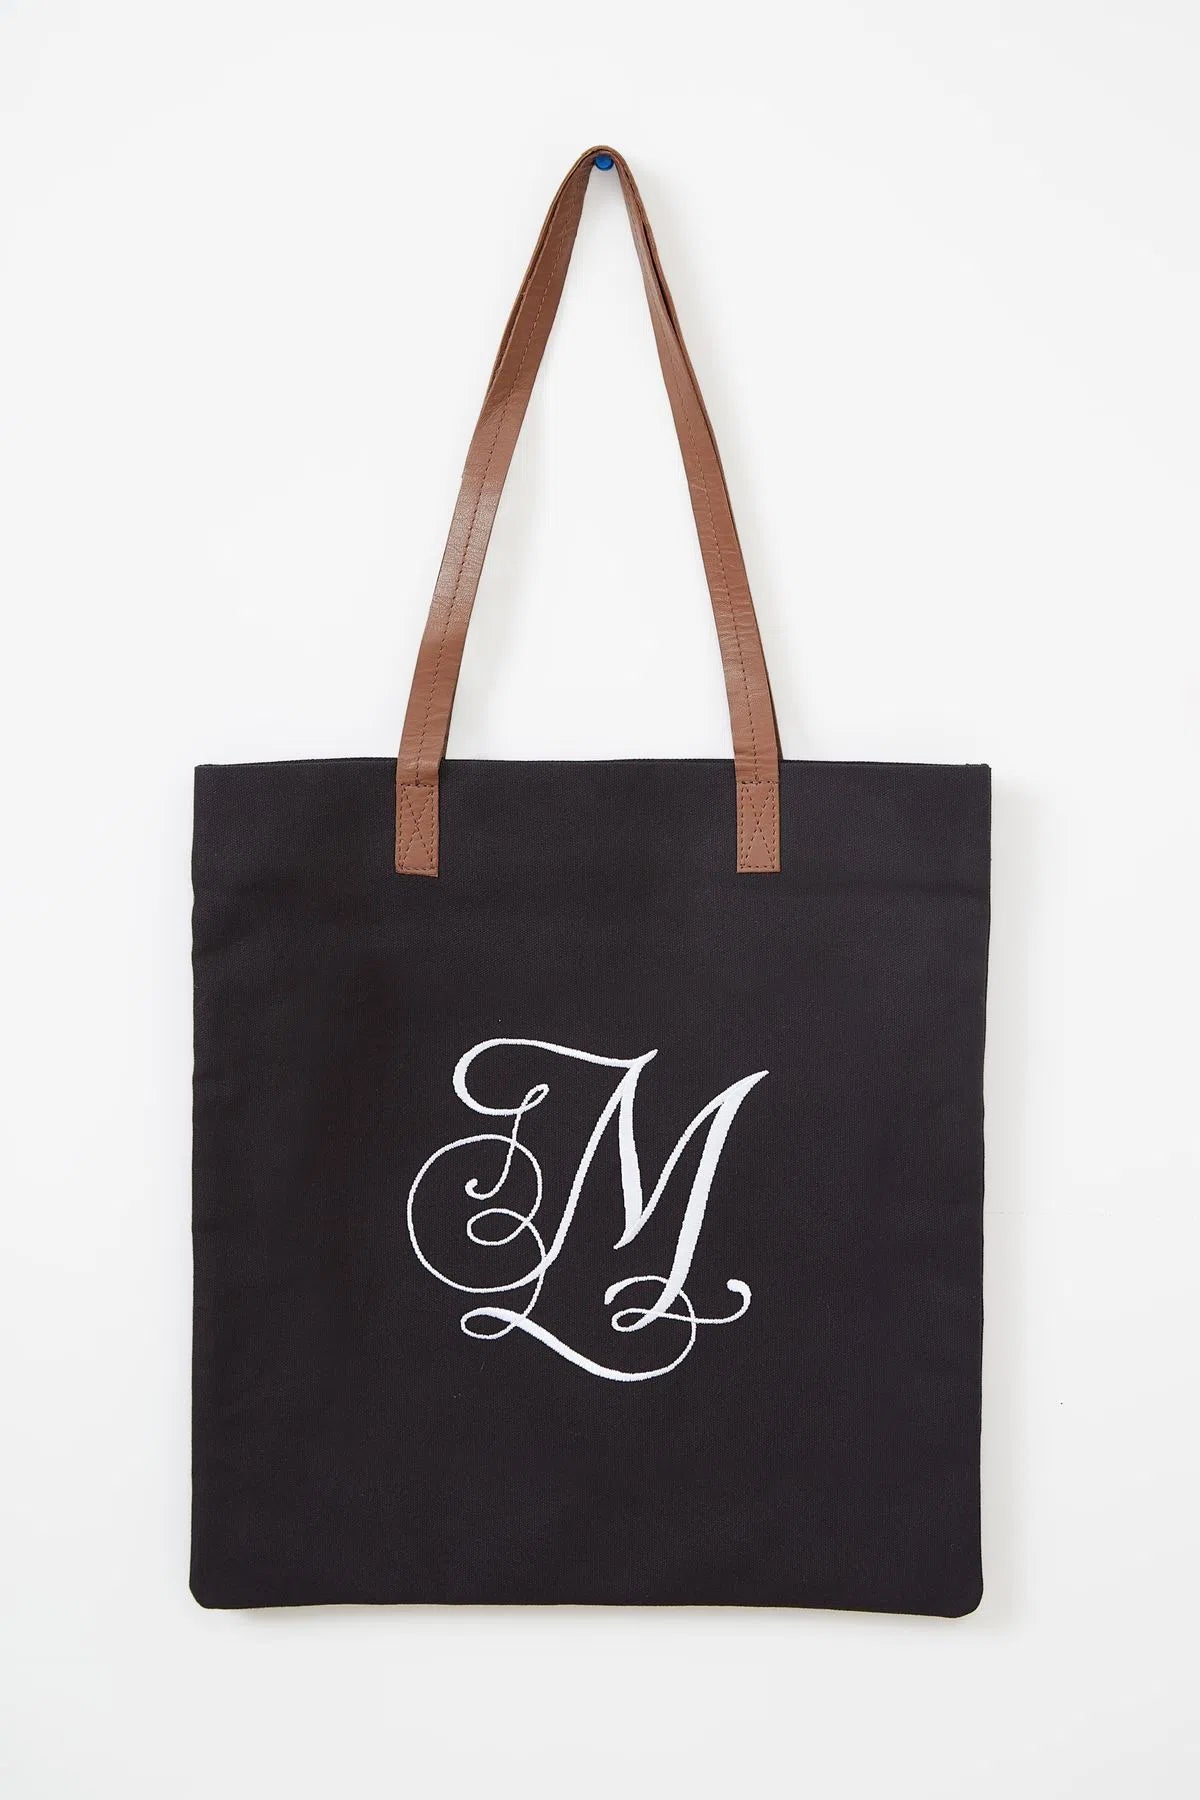 Cara Letter Canvas Tote Bag